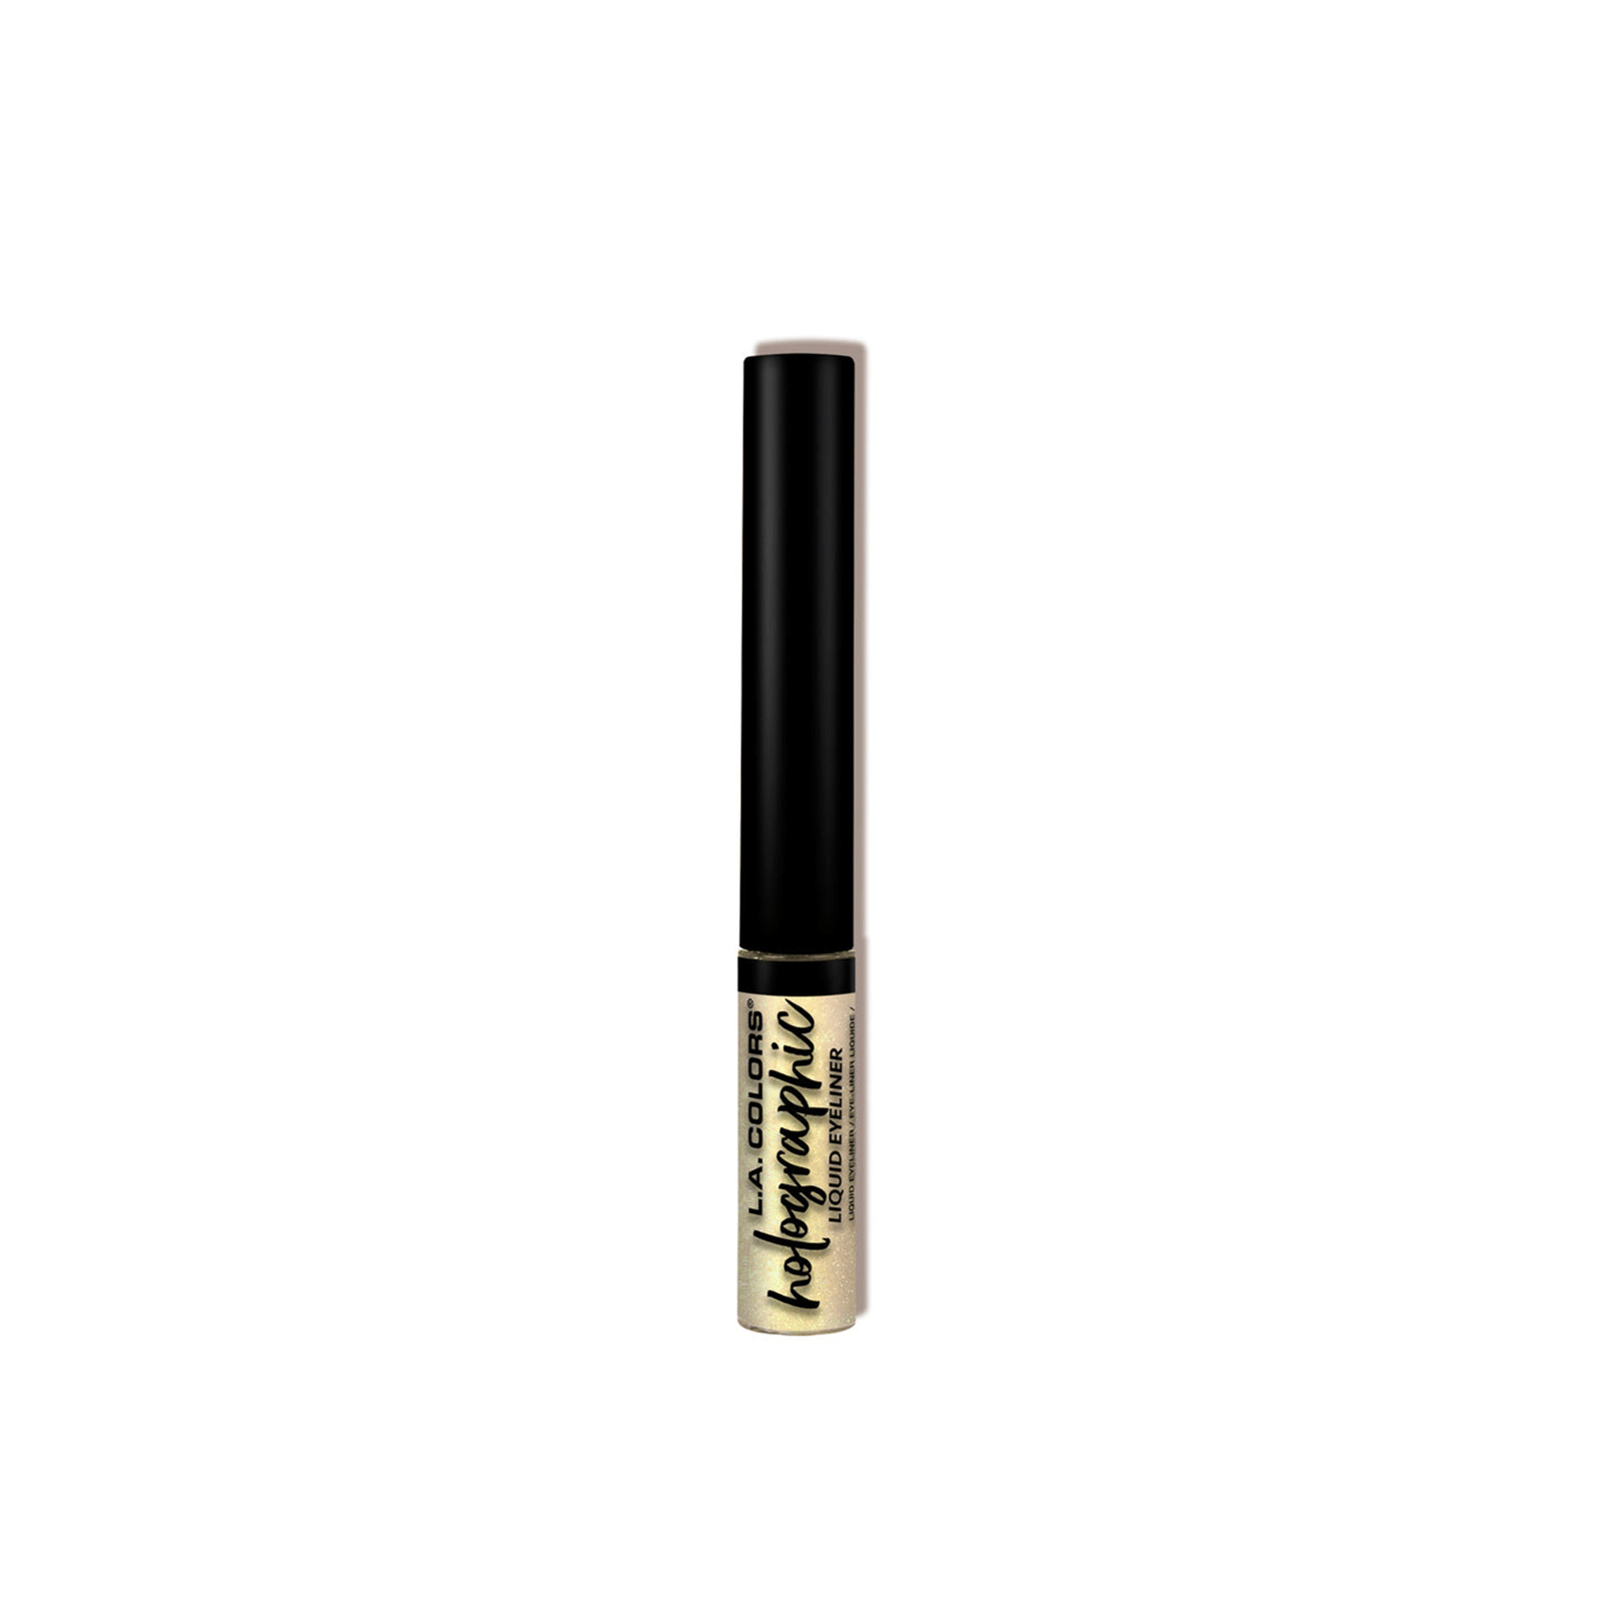 L.A. Colors Liquid Eyeliner Holographic CLE808 Holographic Galactic Gold 5ml (0.17 fl oz)